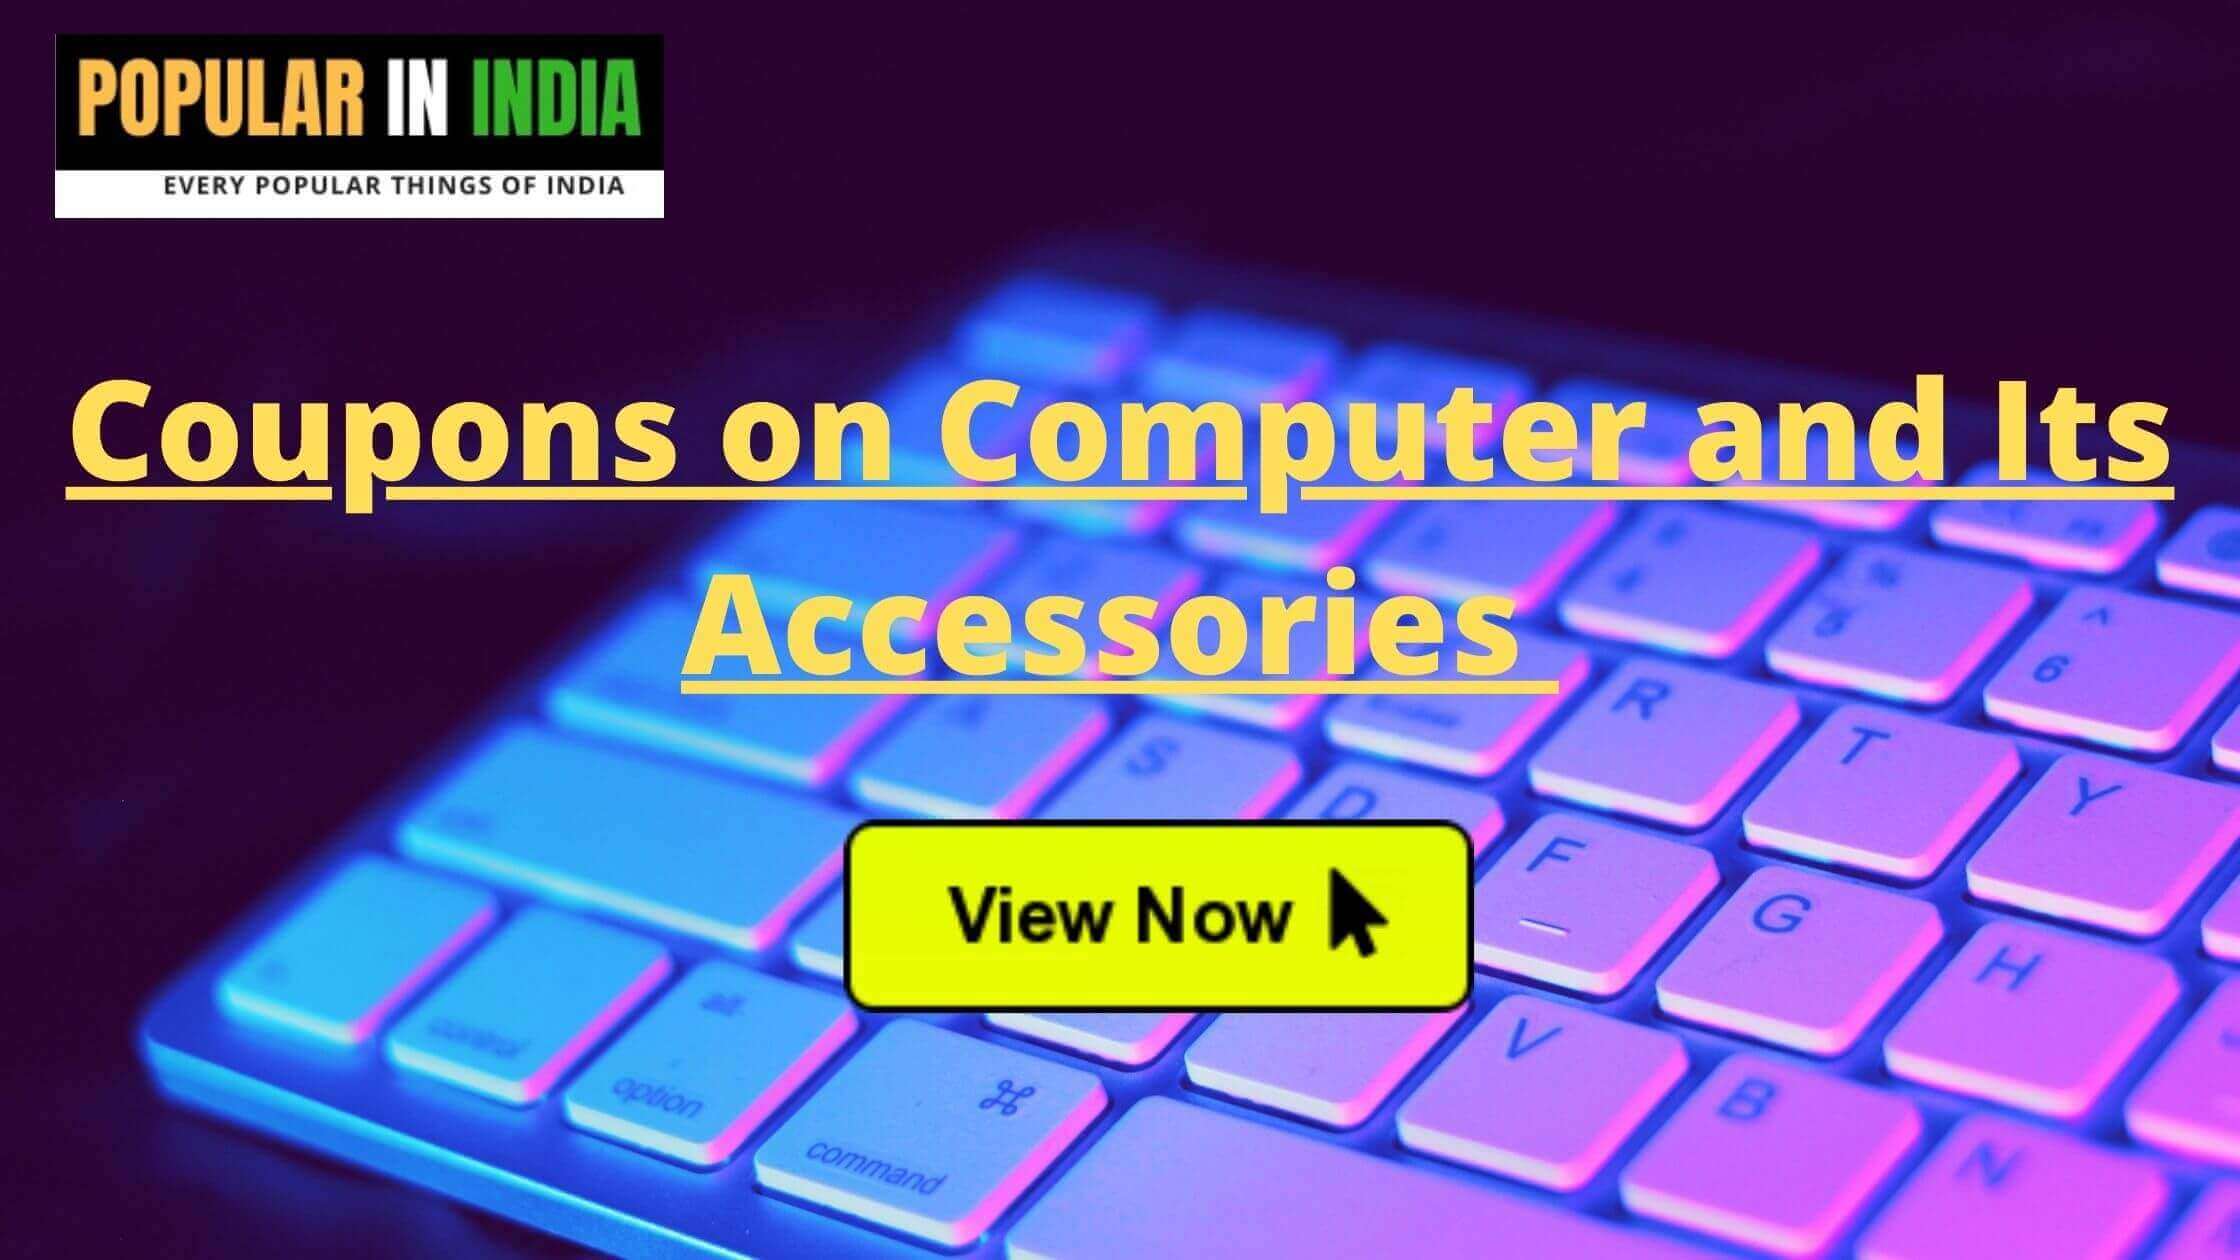 Coupons on Computer and its accessories from amazon